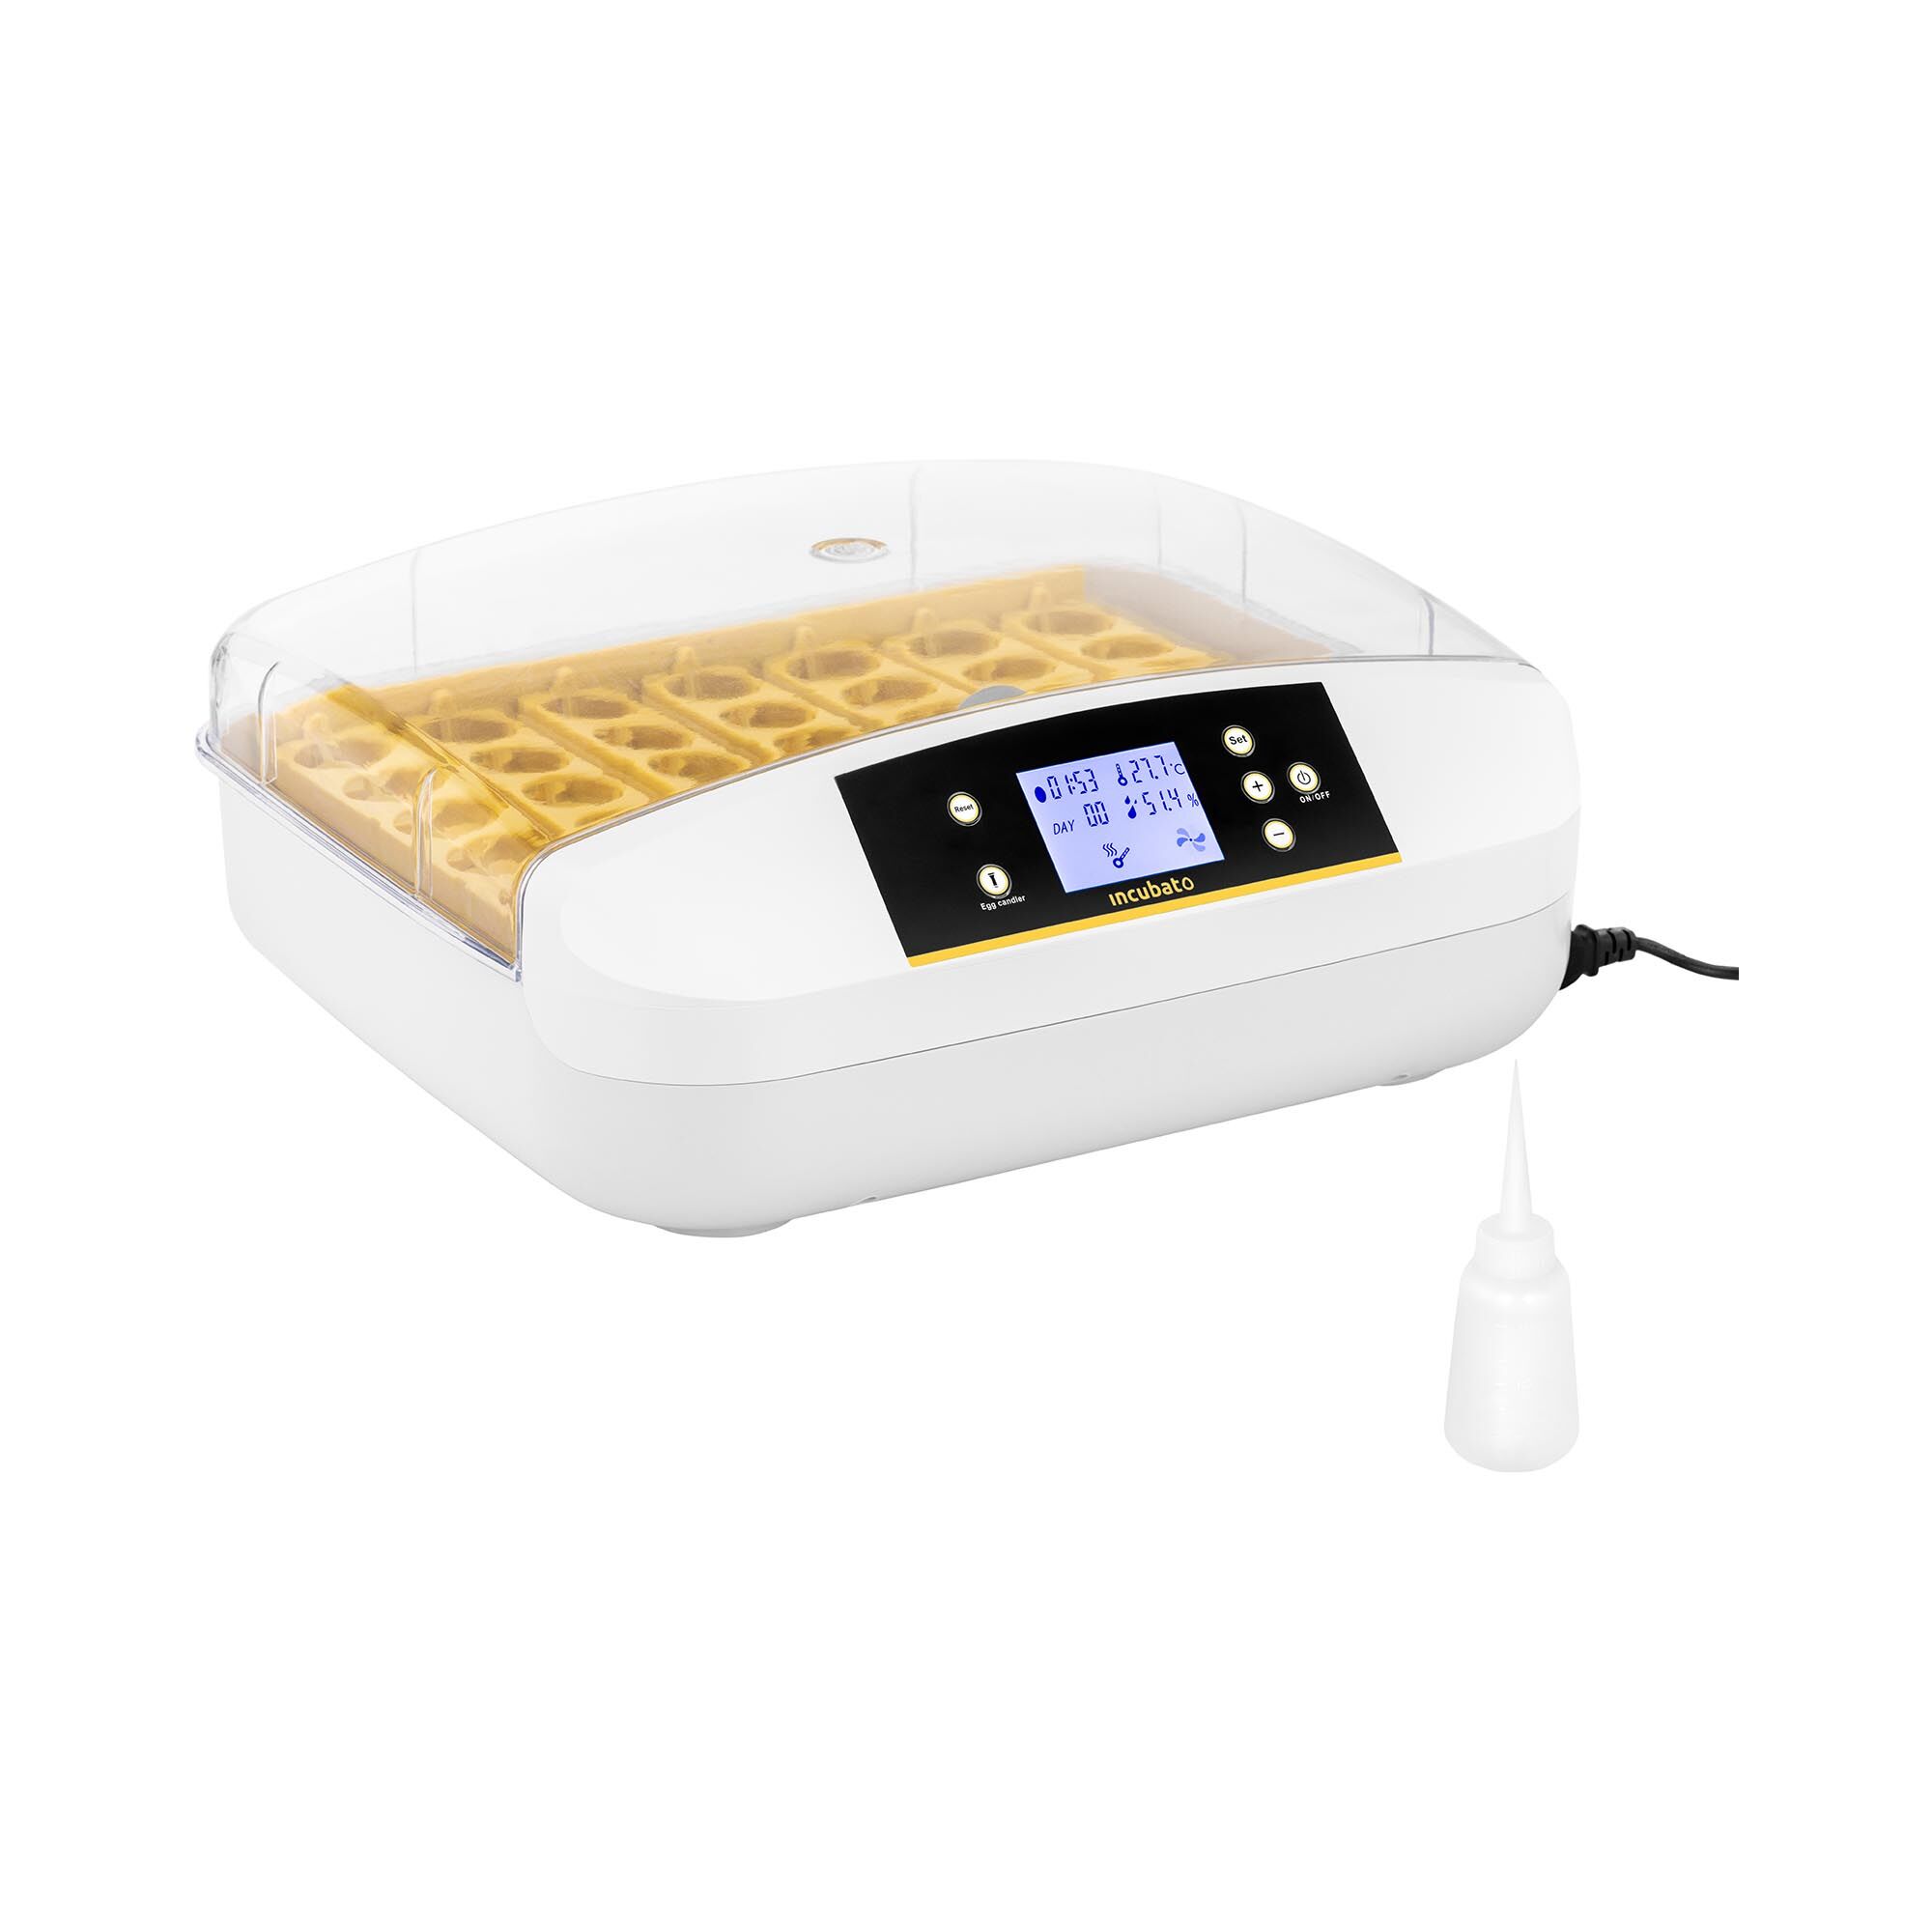 incubato Egg Incubator - 32 eggs - built-in candler - fully automatic